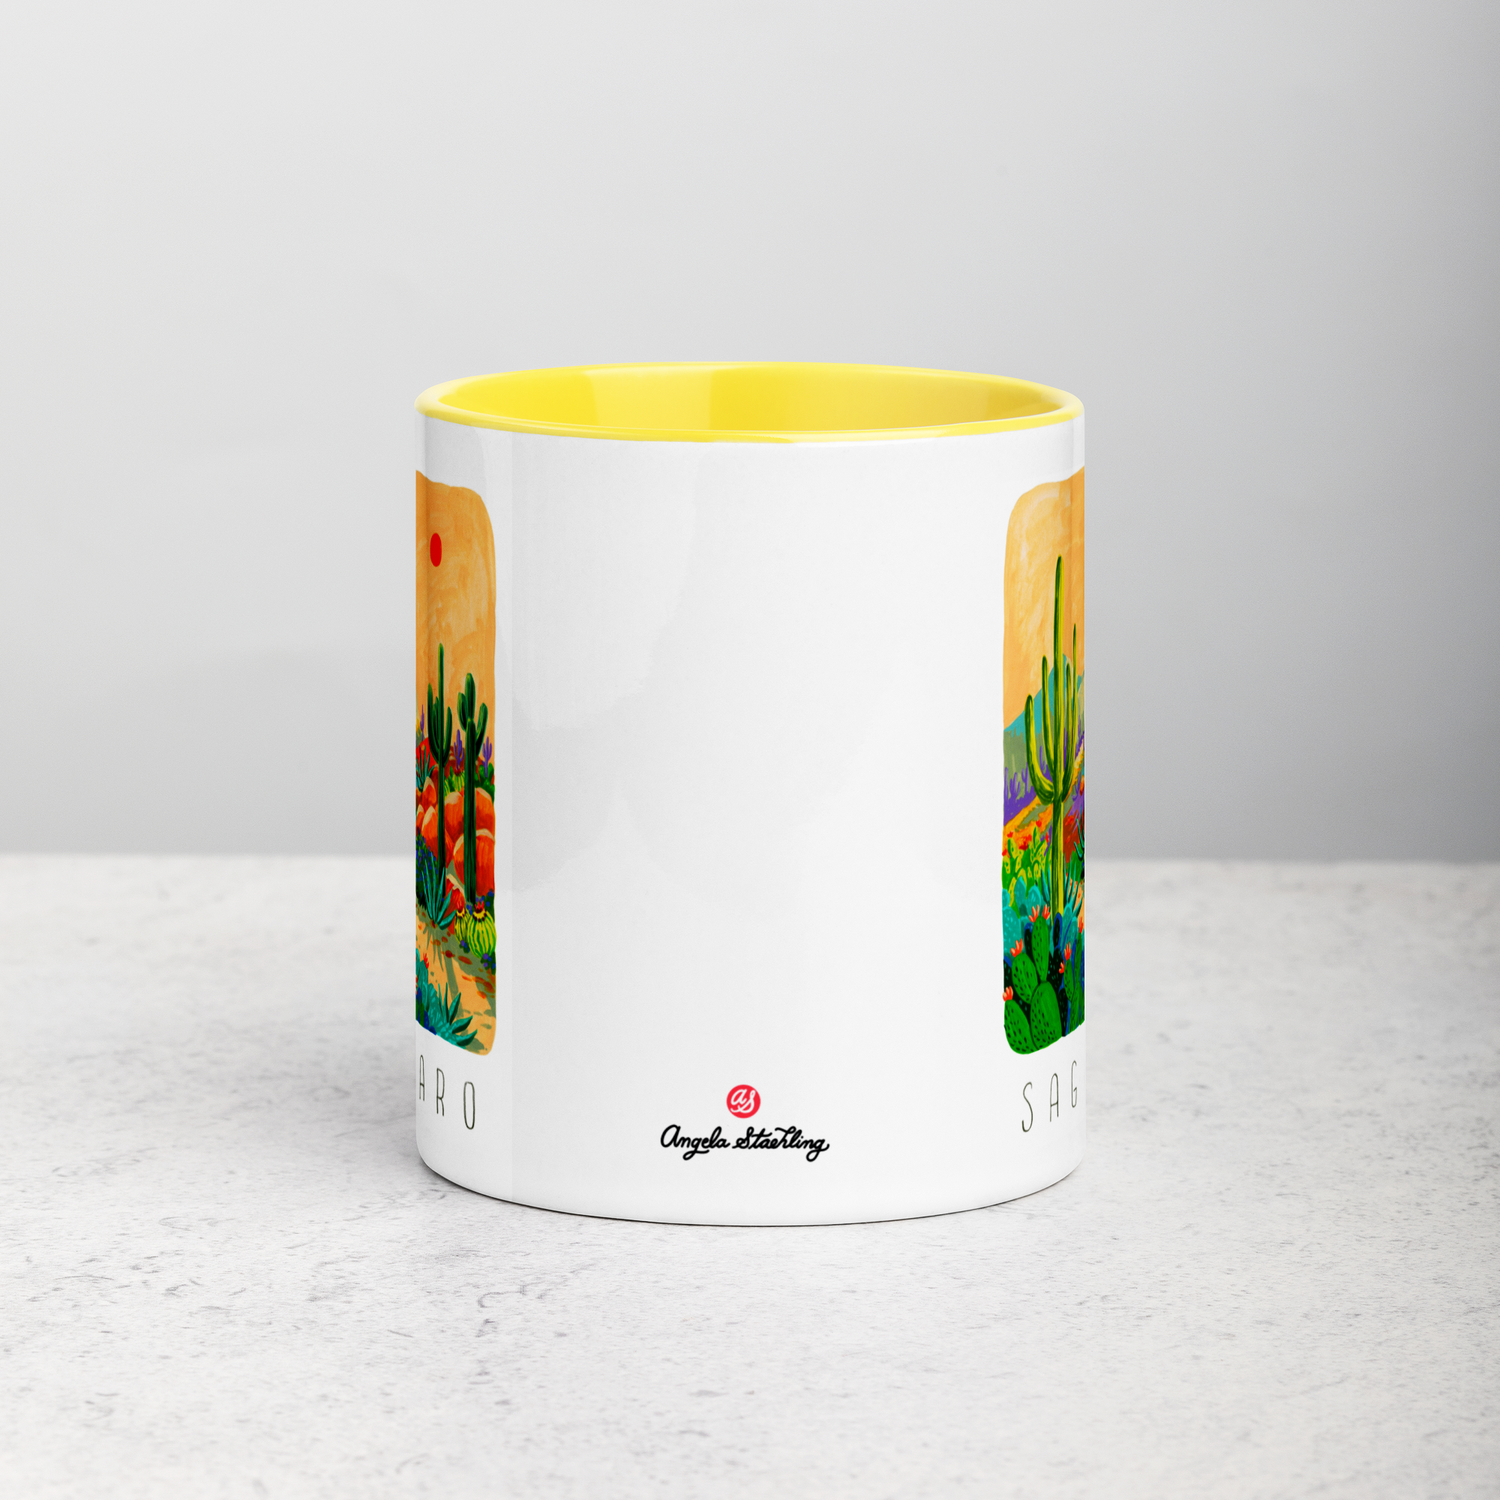 White ceramic coffee mug with yellow handle and inside; has Saguaro National Park illustration by Angela Staehling